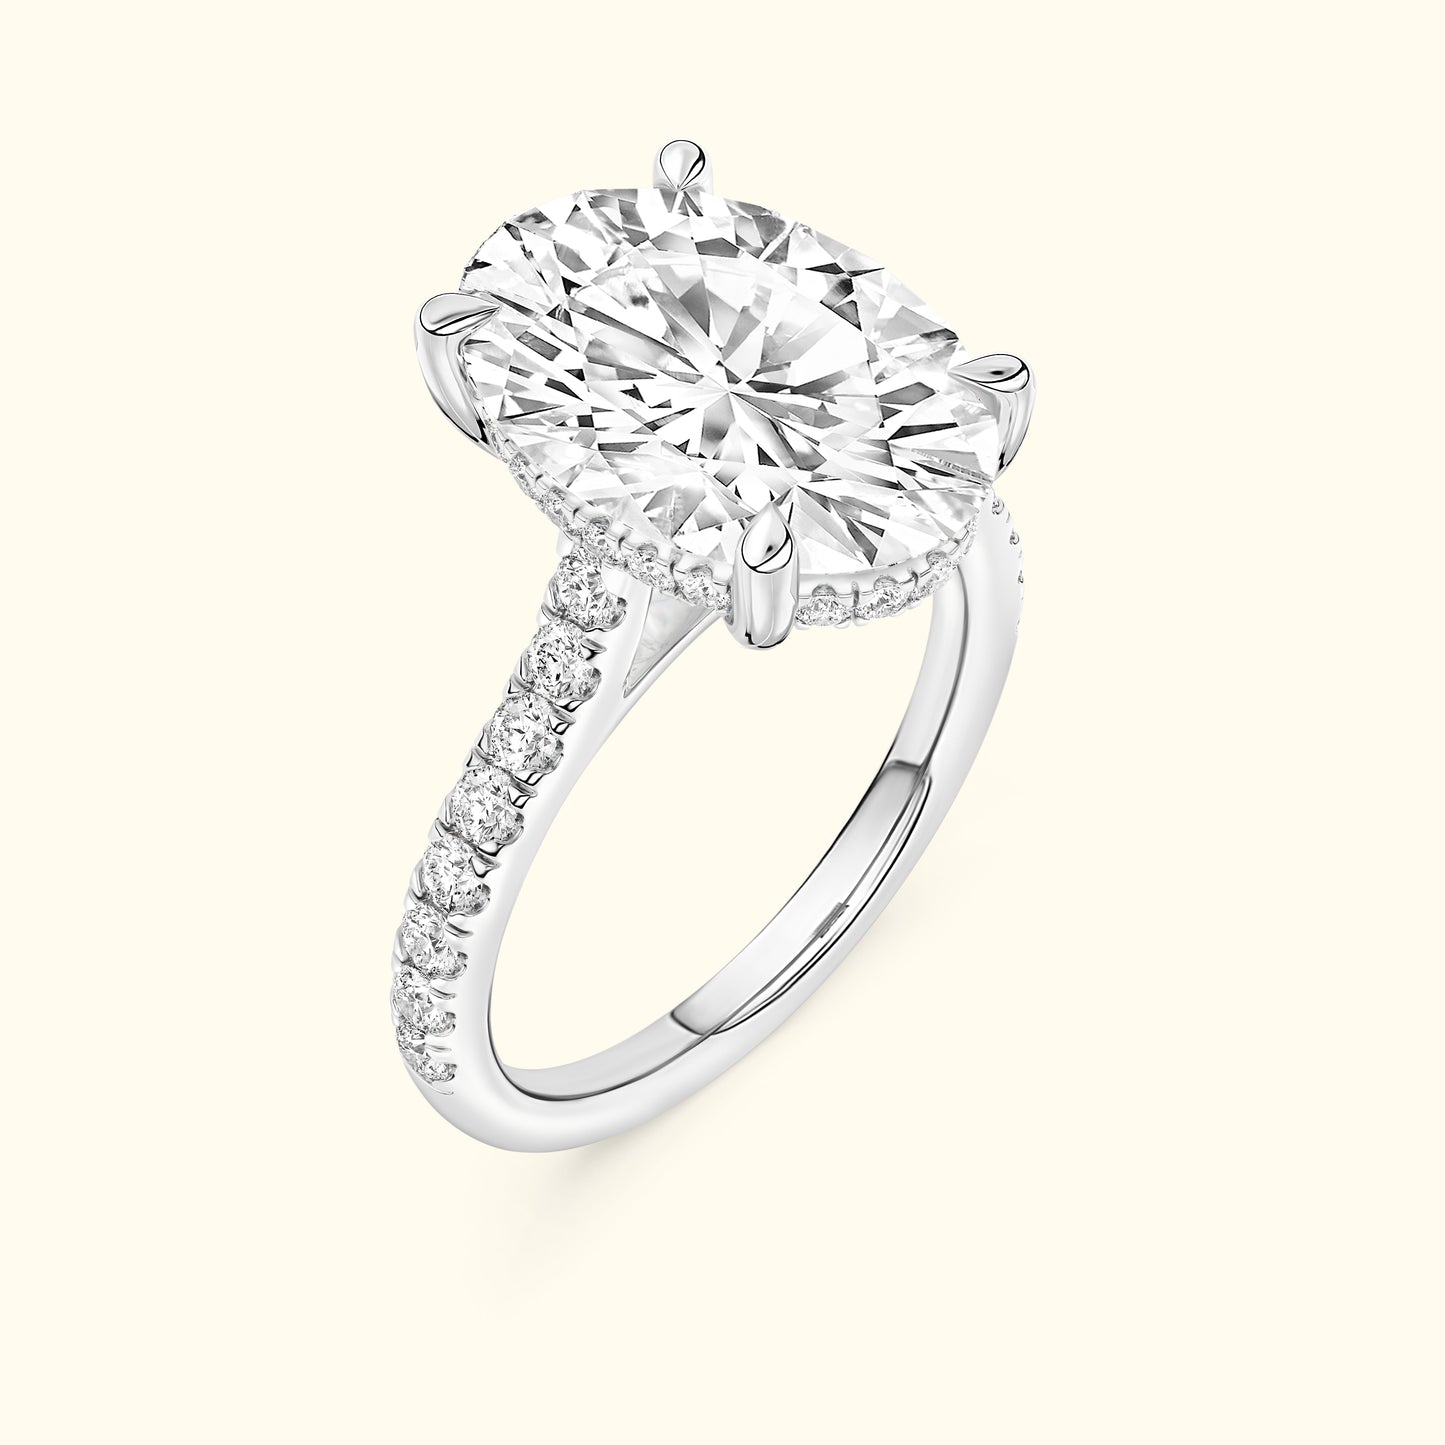 'Elizabeth' Ring with 5.04ct Oval Diamond